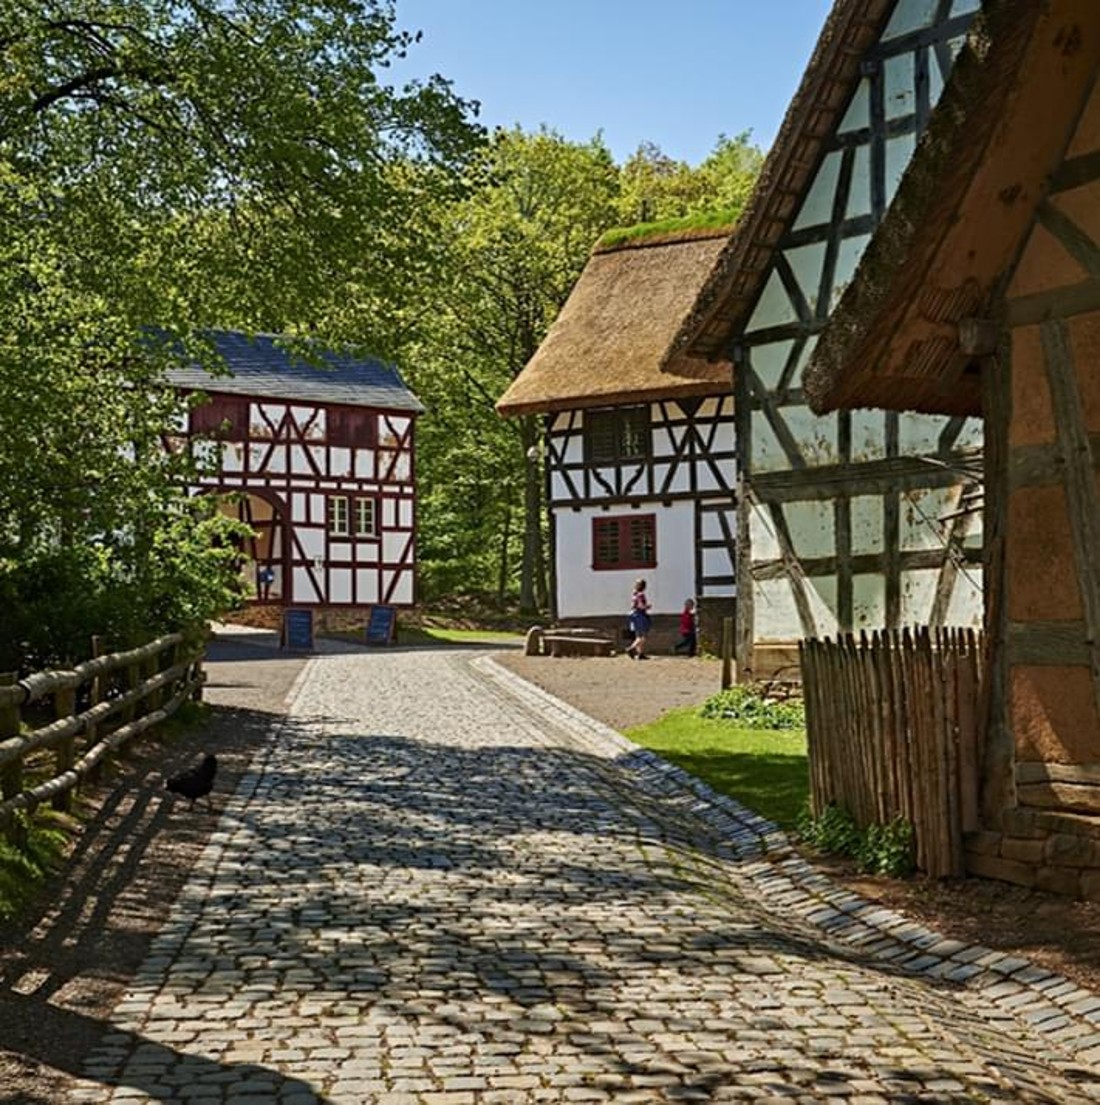 Cobblestone path and half-timbered houses